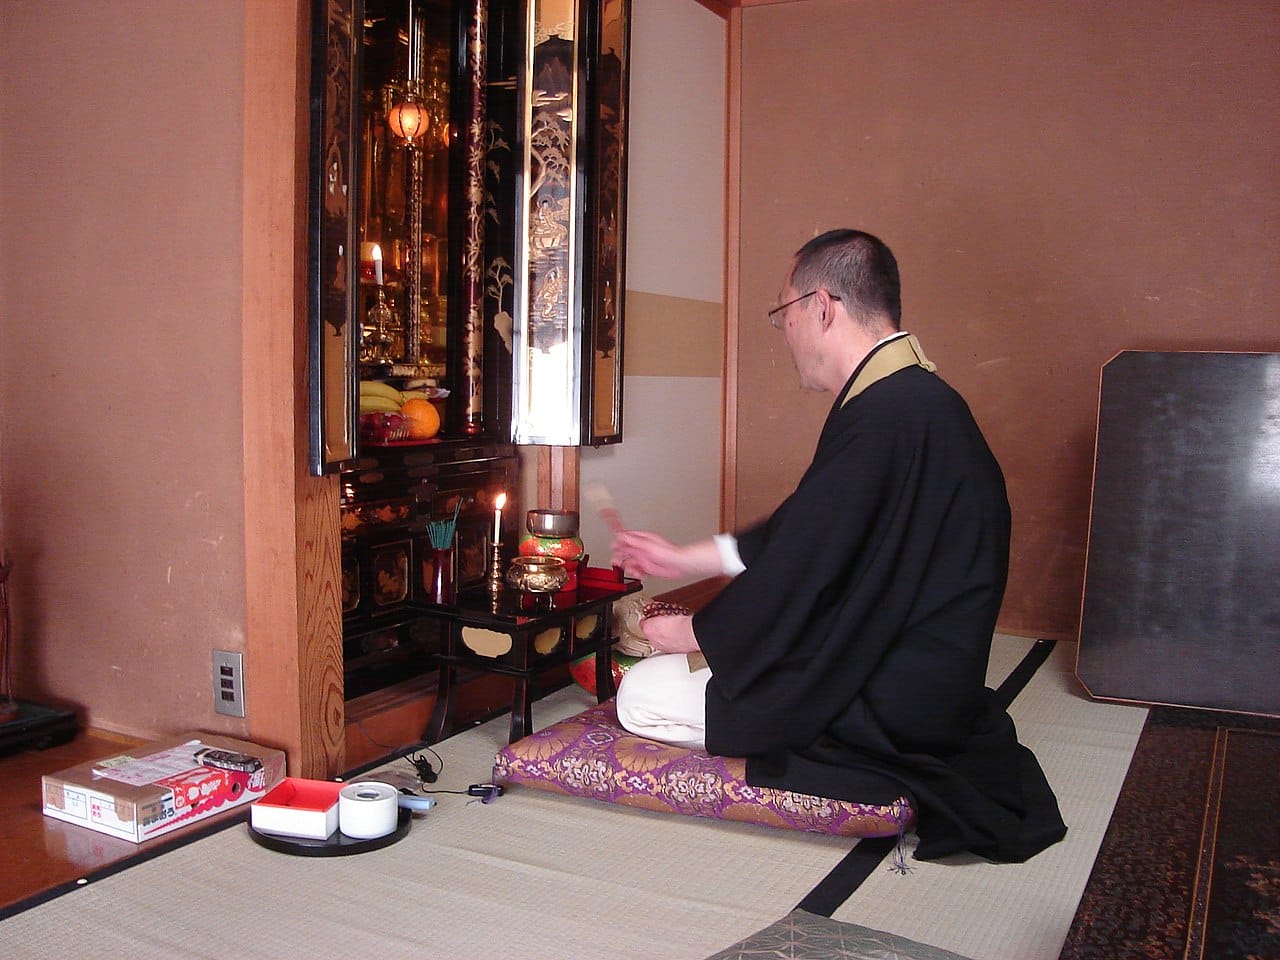 px Buddhist chanting in Japanese at the death anniversary of a parishioner in